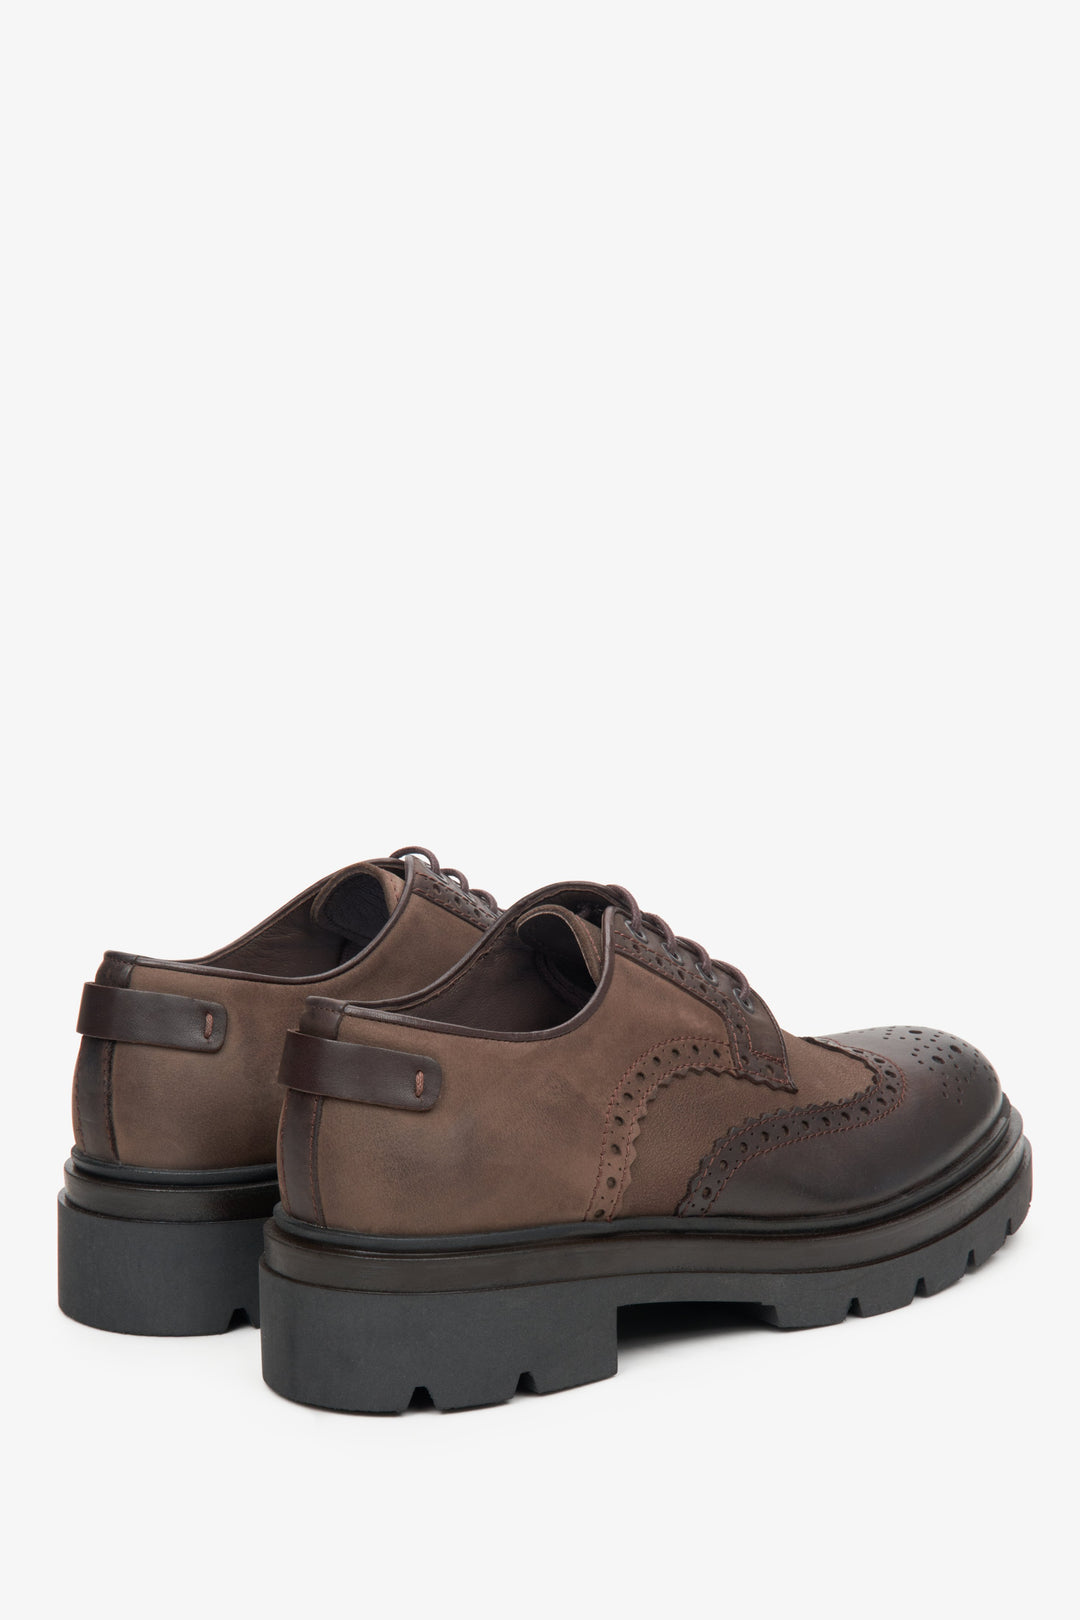 Men's leather brown shoes by Estro - close-up on the heel and side stripe.